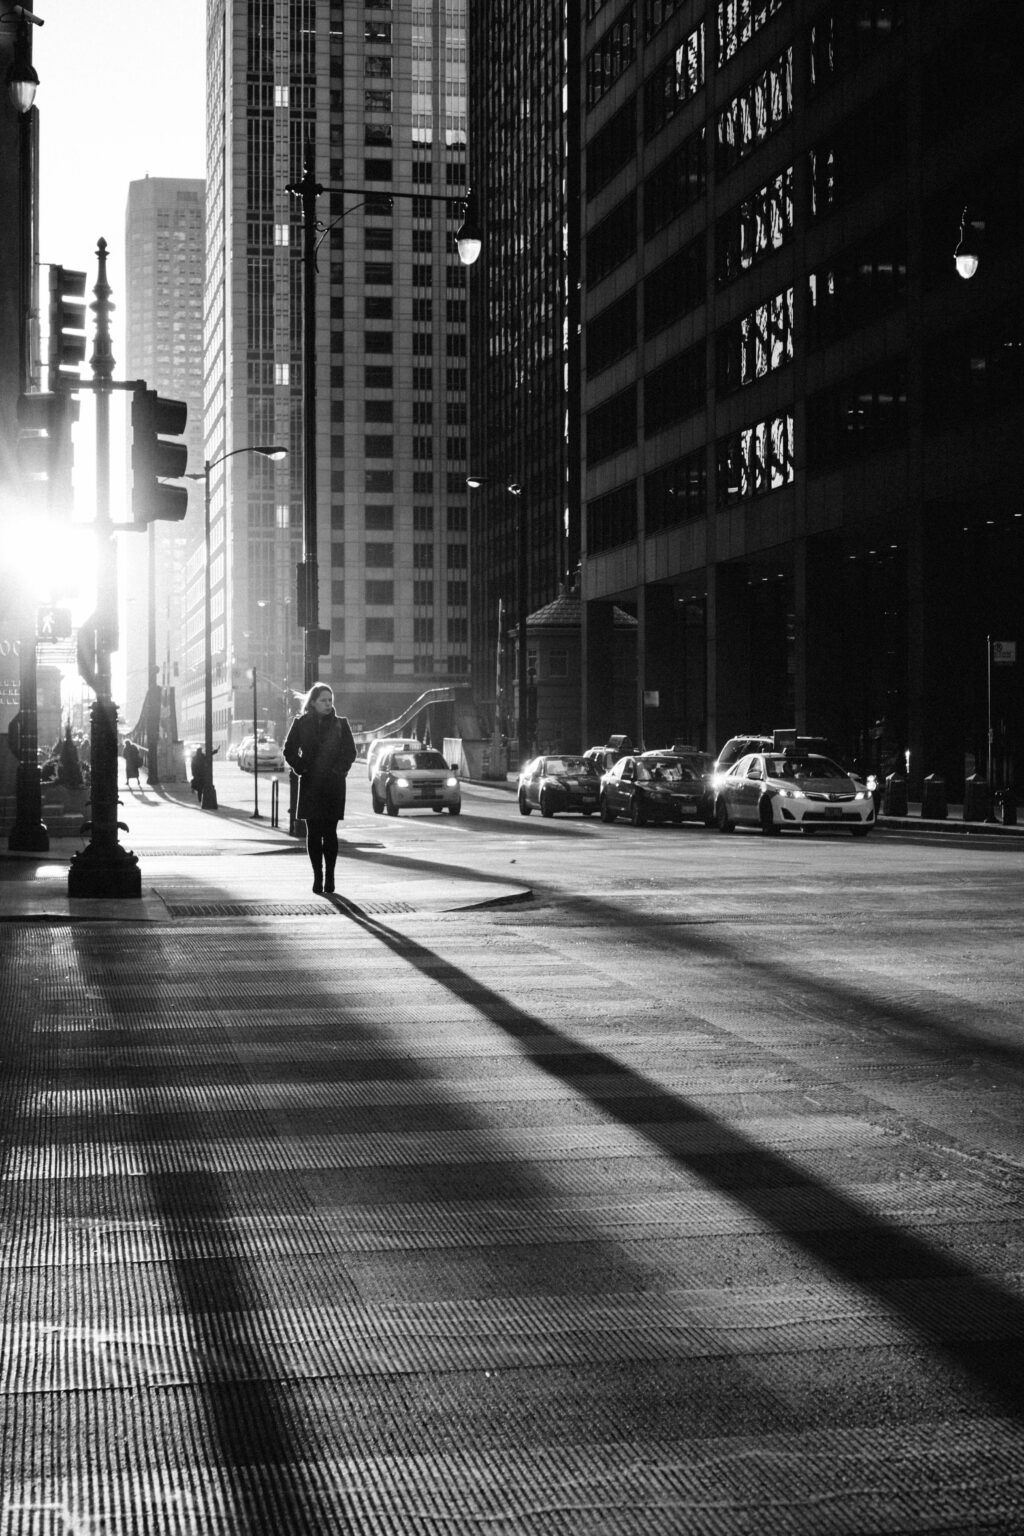 Shadow of a person crossing a street in a large city street photos street portraits